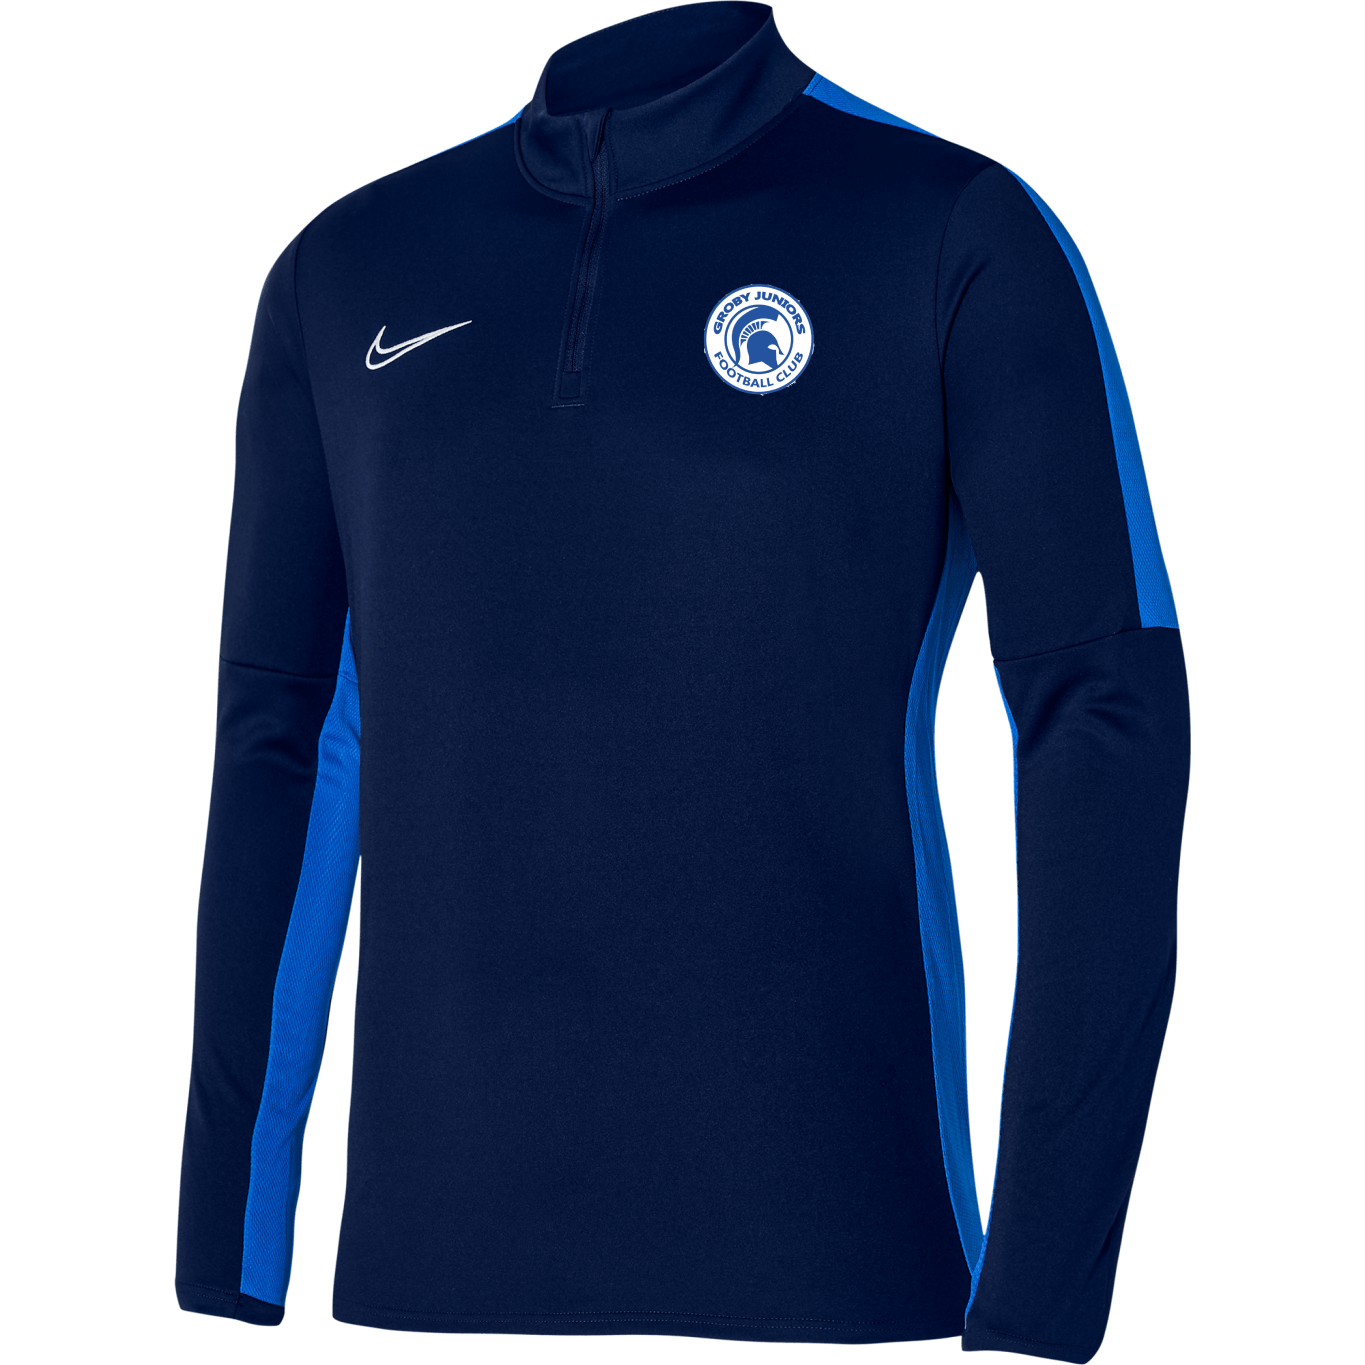 Groby Juniors - Academy 23 Drill Top